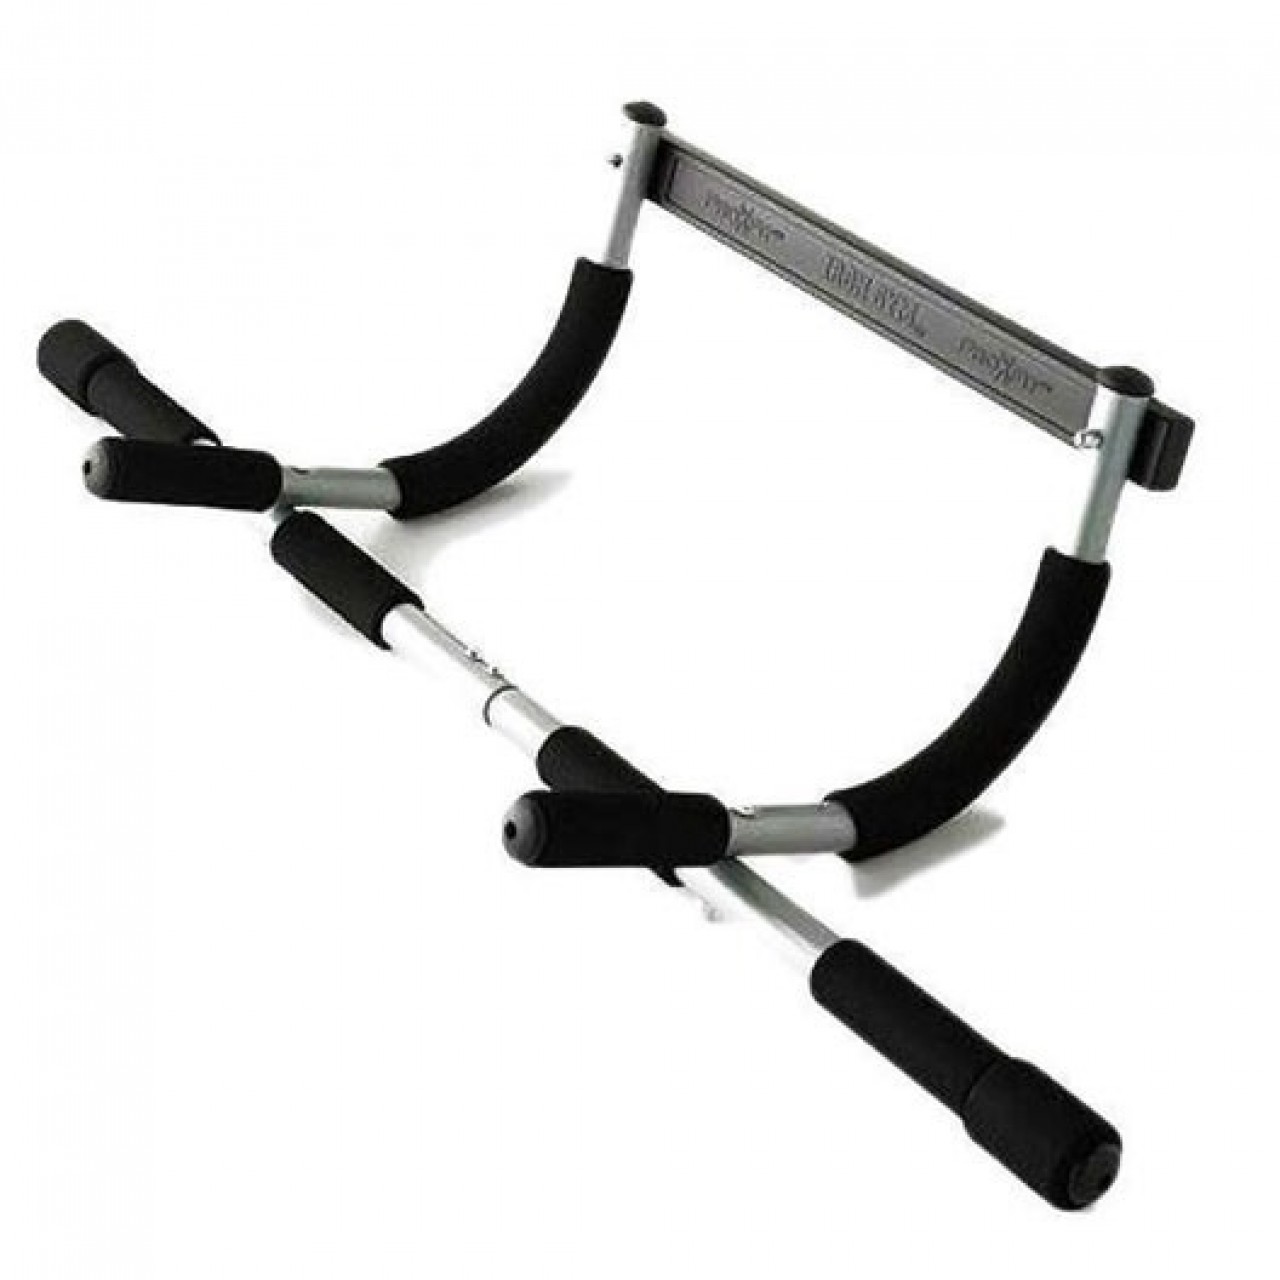 Portable High Quality All in Pull Up Bar For Home & Gym Workout